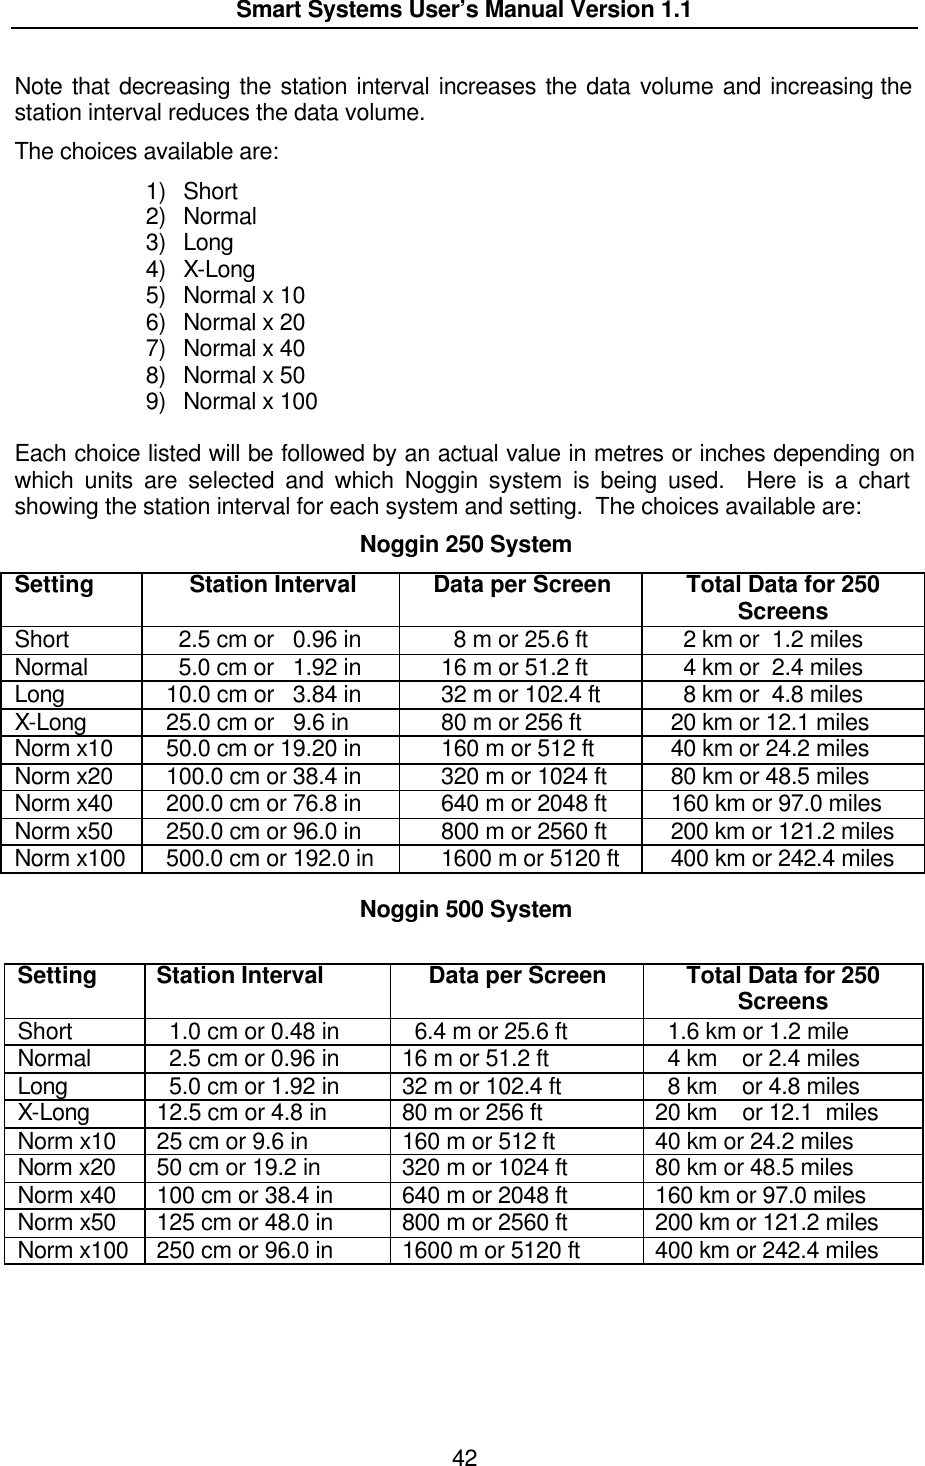  Smart Systems User’s Manual Version 1.1  42  Note that decreasing the station interval increases the data volume and increasing the station interval reduces the data volume.   The choices available are: 1) Short 2) Normal 3) Long 4) X-Long 5) Normal x 10 6) Normal x 20 7) Normal x 40 8) Normal x 50 9) Normal x 100  Each choice listed will be followed by an actual value in metres or inches depending on which units are selected and which Noggin system is being used.  Here is a chart showing the station interval for each system and setting.  The choices available are: Noggin 250 System Setting  Station Interval Data per Screen Total Data for 250 Screens Short   2.5 cm or   0.96 in   8 m or 25.6 ft   2 km or  1.2 miles Normal   5.0 cm or   1.92 in 16 m or 51.2 ft   4 km or  2.4 miles Long 10.0 cm or   3.84 in 32 m or 102.4 ft   8 km or  4.8 miles X-Long 25.0 cm or   9.6 in 80 m or 256 ft 20 km or 12.1 miles Norm x10 50.0 cm or 19.20 in 160 m or 512 ft 40 km or 24.2 miles Norm x20 100.0 cm or 38.4 in 320 m or 1024 ft 80 km or 48.5 miles Norm x40 200.0 cm or 76.8 in 640 m or 2048 ft 160 km or 97.0 miles Norm x50 250.0 cm or 96.0 in 800 m or 2560 ft 200 km or 121.2 miles Norm x100 500.0 cm or 192.0 in 1600 m or 5120 ft 400 km or 242.4 miles  Noggin 500 System Setting  Station Interval Data per Screen Total Data for 250 Screens Short   1.0 cm or 0.48 in   6.4 m or 25.6 ft   1.6 km or 1.2 mile Normal   2.5 cm or 0.96 in 16 m or 51.2 ft   4 km    or 2.4 miles Long   5.0 cm or 1.92 in 32 m or 102.4 ft   8 km    or 4.8 miles X-Long 12.5 cm or 4.8 in 80 m or 256 ft 20 km    or 12.1  miles Norm x10 25 cm or 9.6 in 160 m or 512 ft 40 km or 24.2 miles Norm x20 50 cm or 19.2 in 320 m or 1024 ft 80 km or 48.5 miles Norm x40 100 cm or 38.4 in 640 m or 2048 ft 160 km or 97.0 miles Norm x50 125 cm or 48.0 in 800 m or 2560 ft 200 km or 121.2 miles Norm x100 250 cm or 96.0 in 1600 m or 5120 ft 400 km or 242.4 miles  